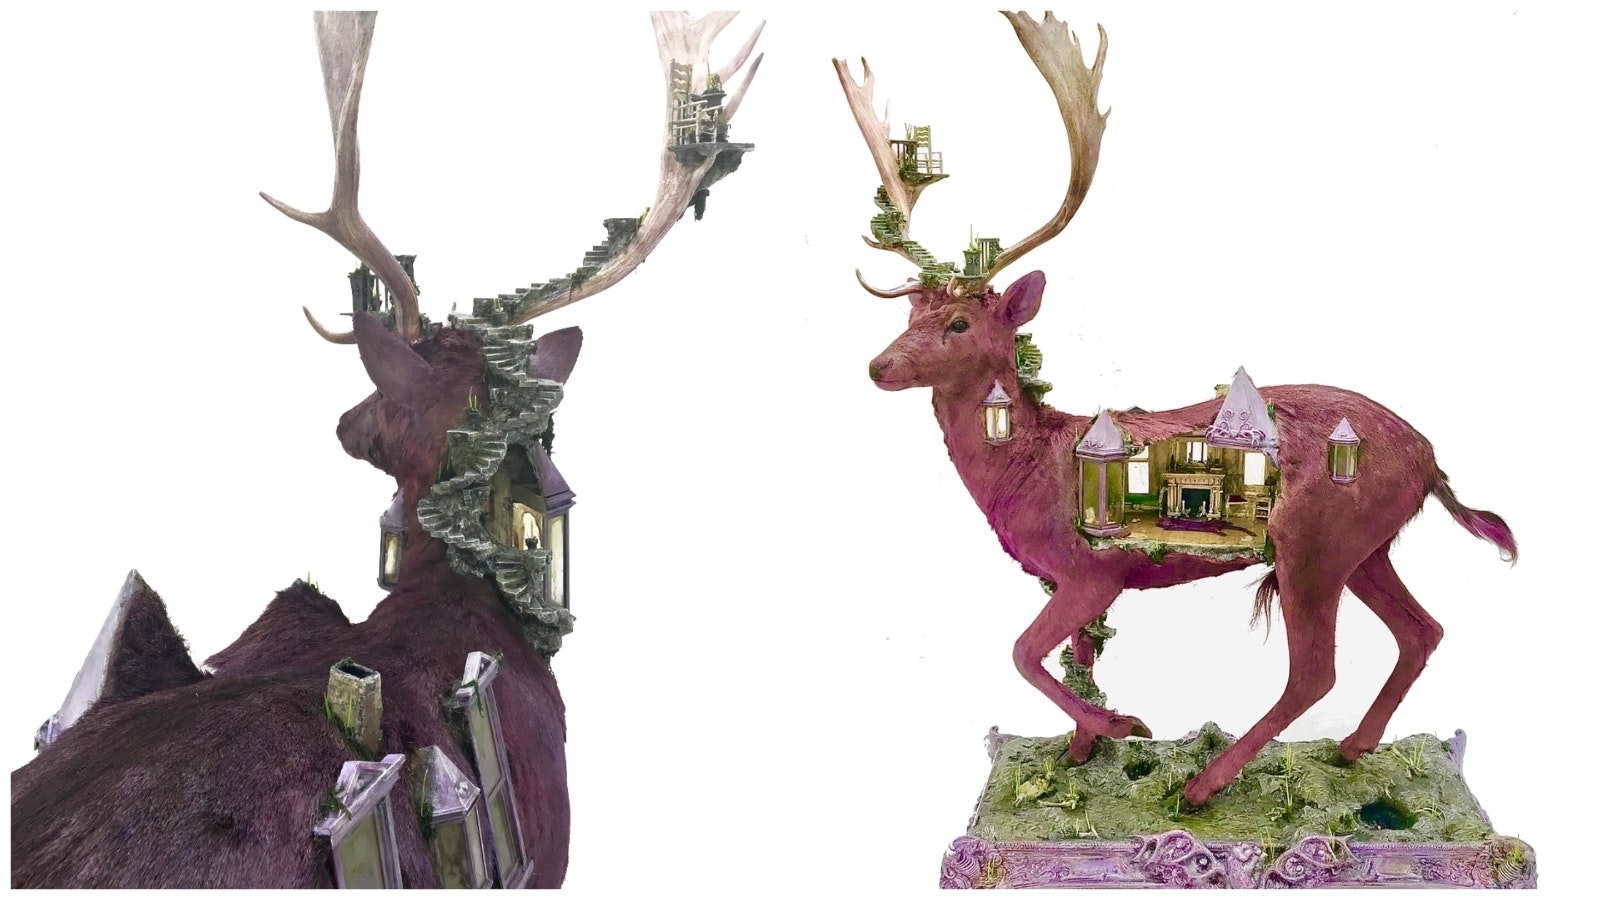 Two views of a rogue taxidermy work titled Violet Knight.